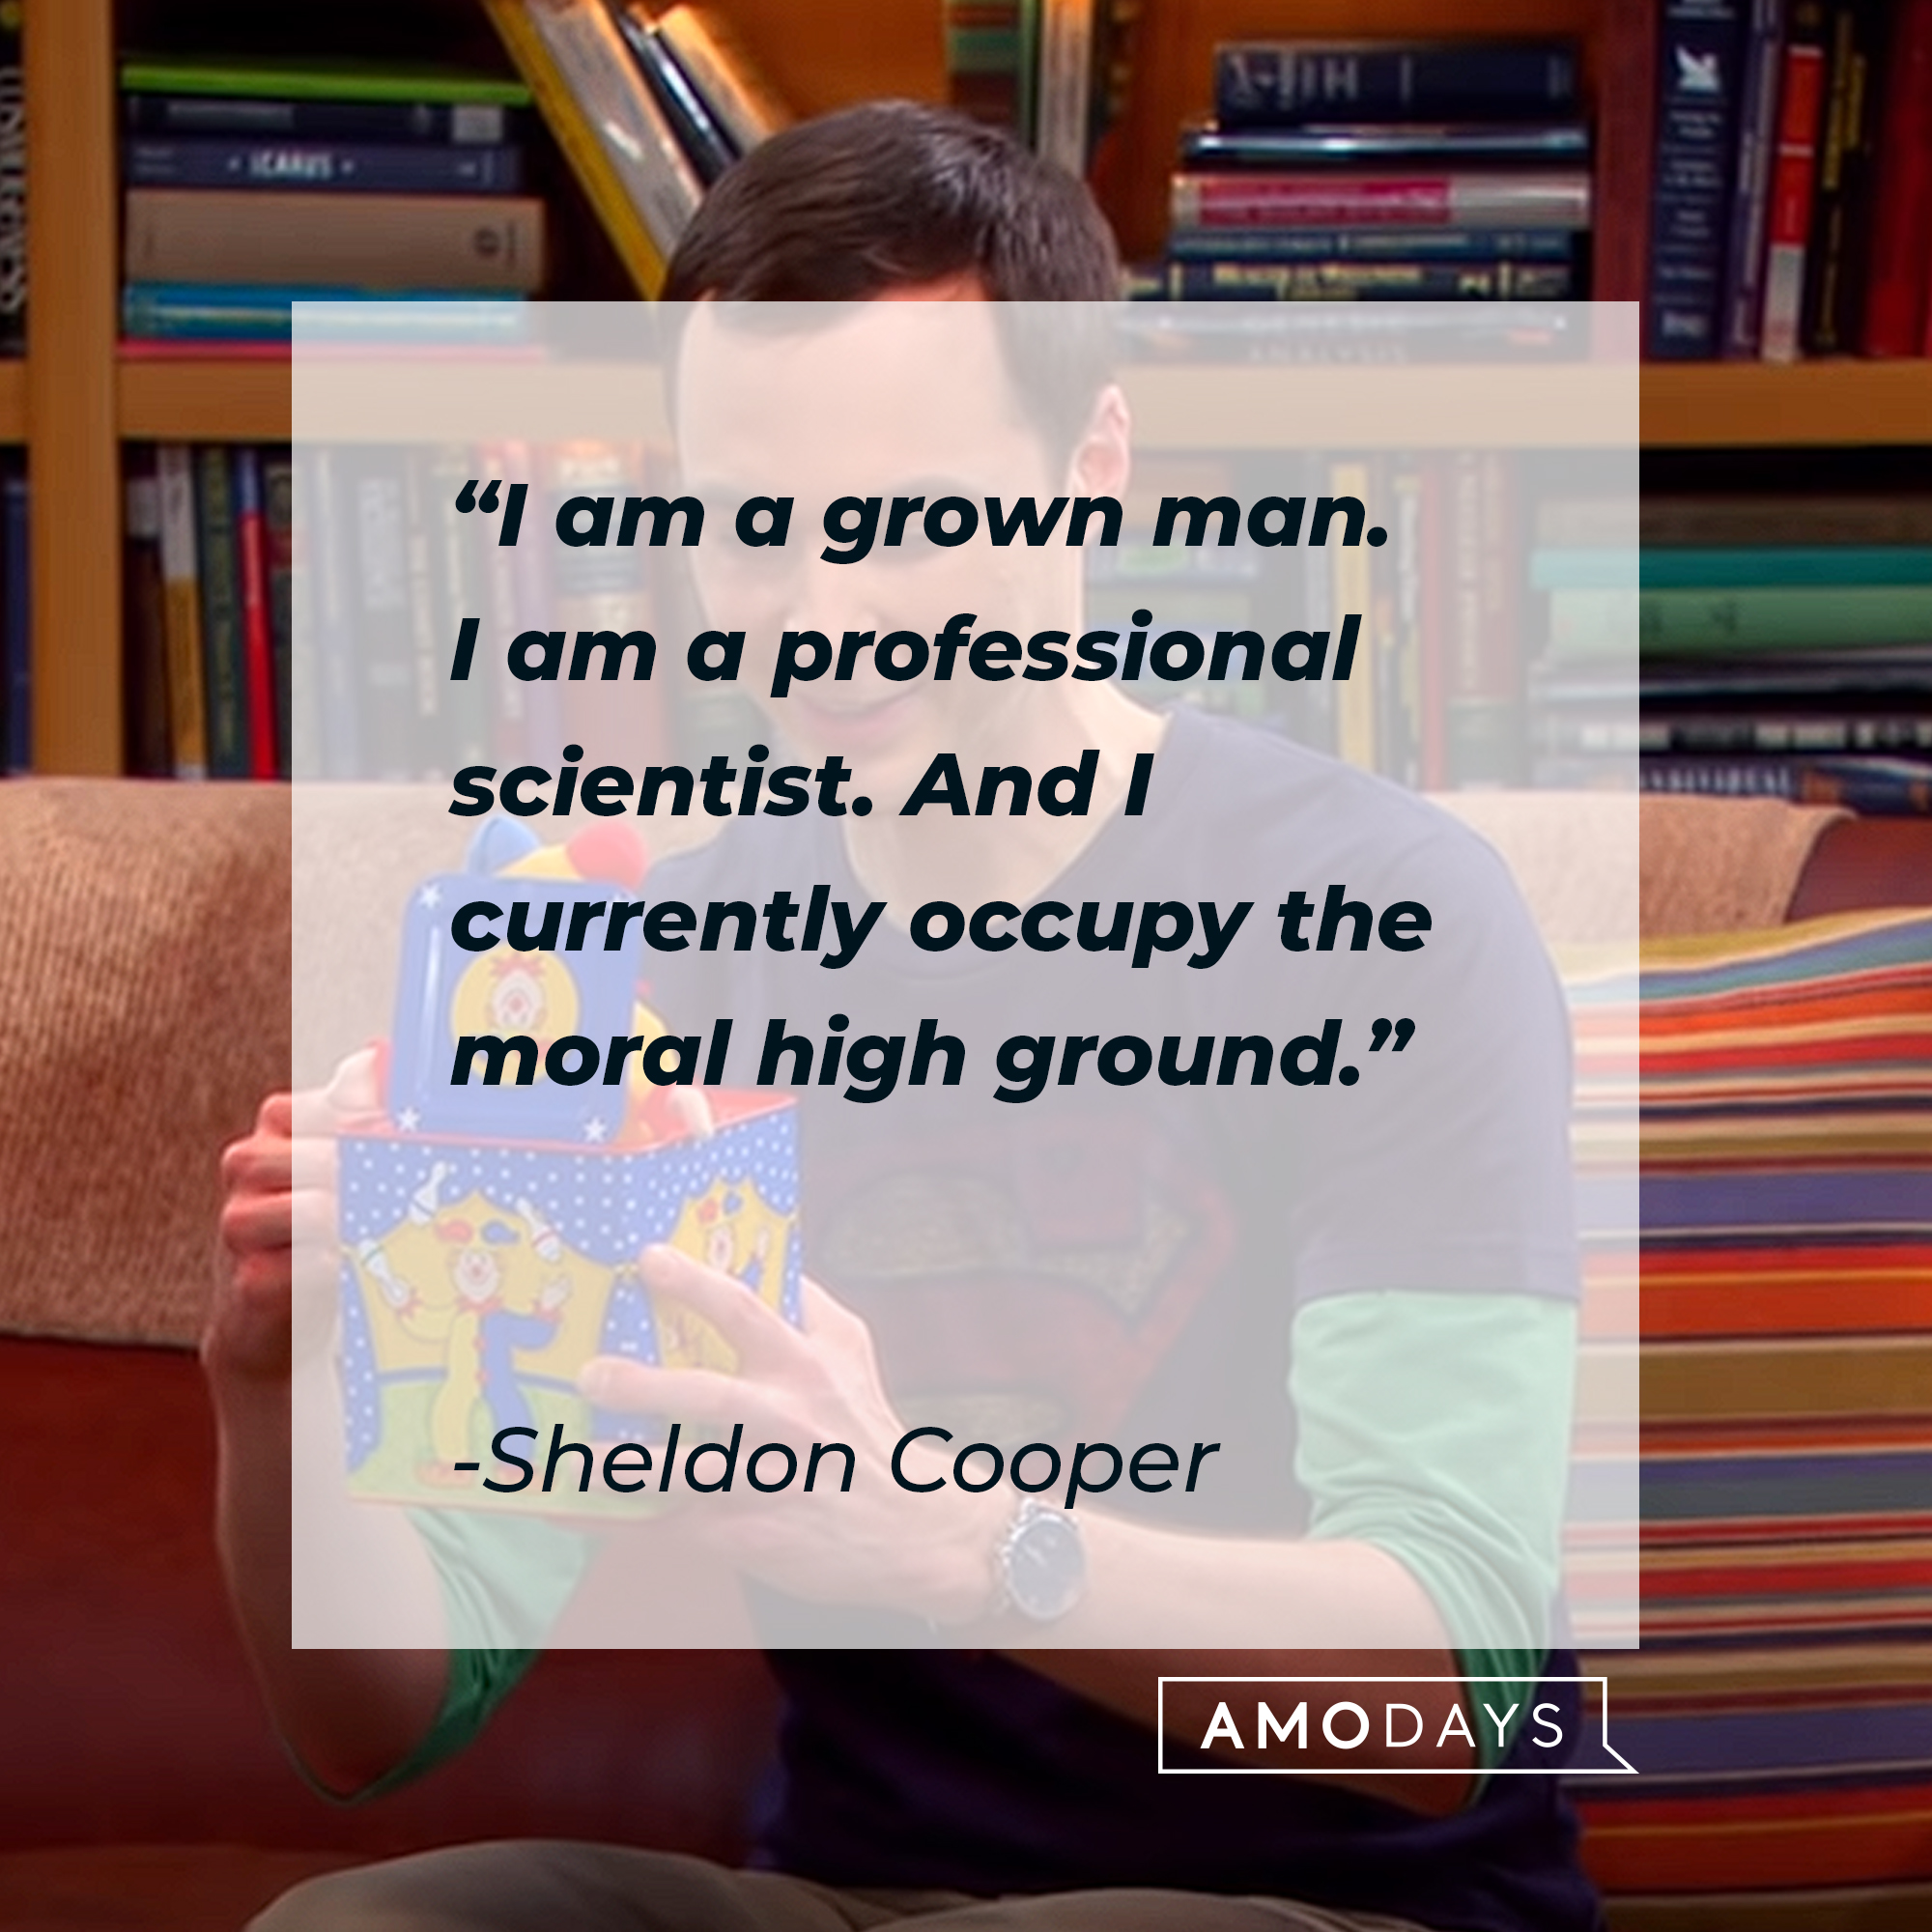 Sheldon Cooper's quote: "I am a grown man. I am a professional scientist. And I currently occupy the moral high ground." | Source: youtube.com/warnerbrostv